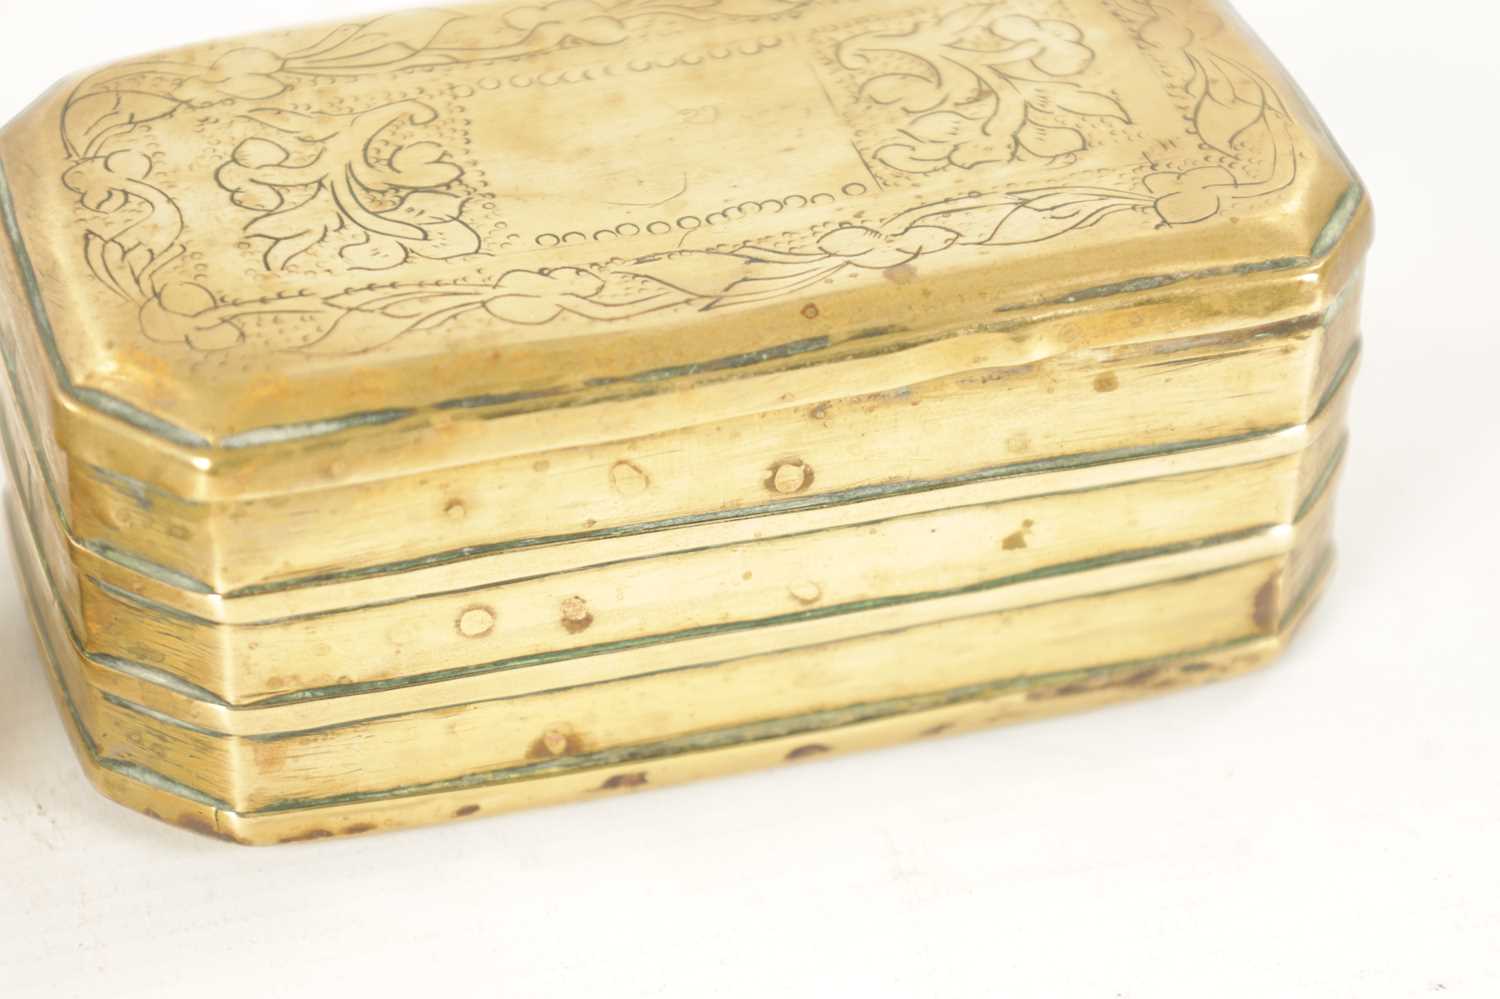 TWO 18TH CENTURY BRASS TOBACCO/SNUFF BOXES - Image 4 of 9